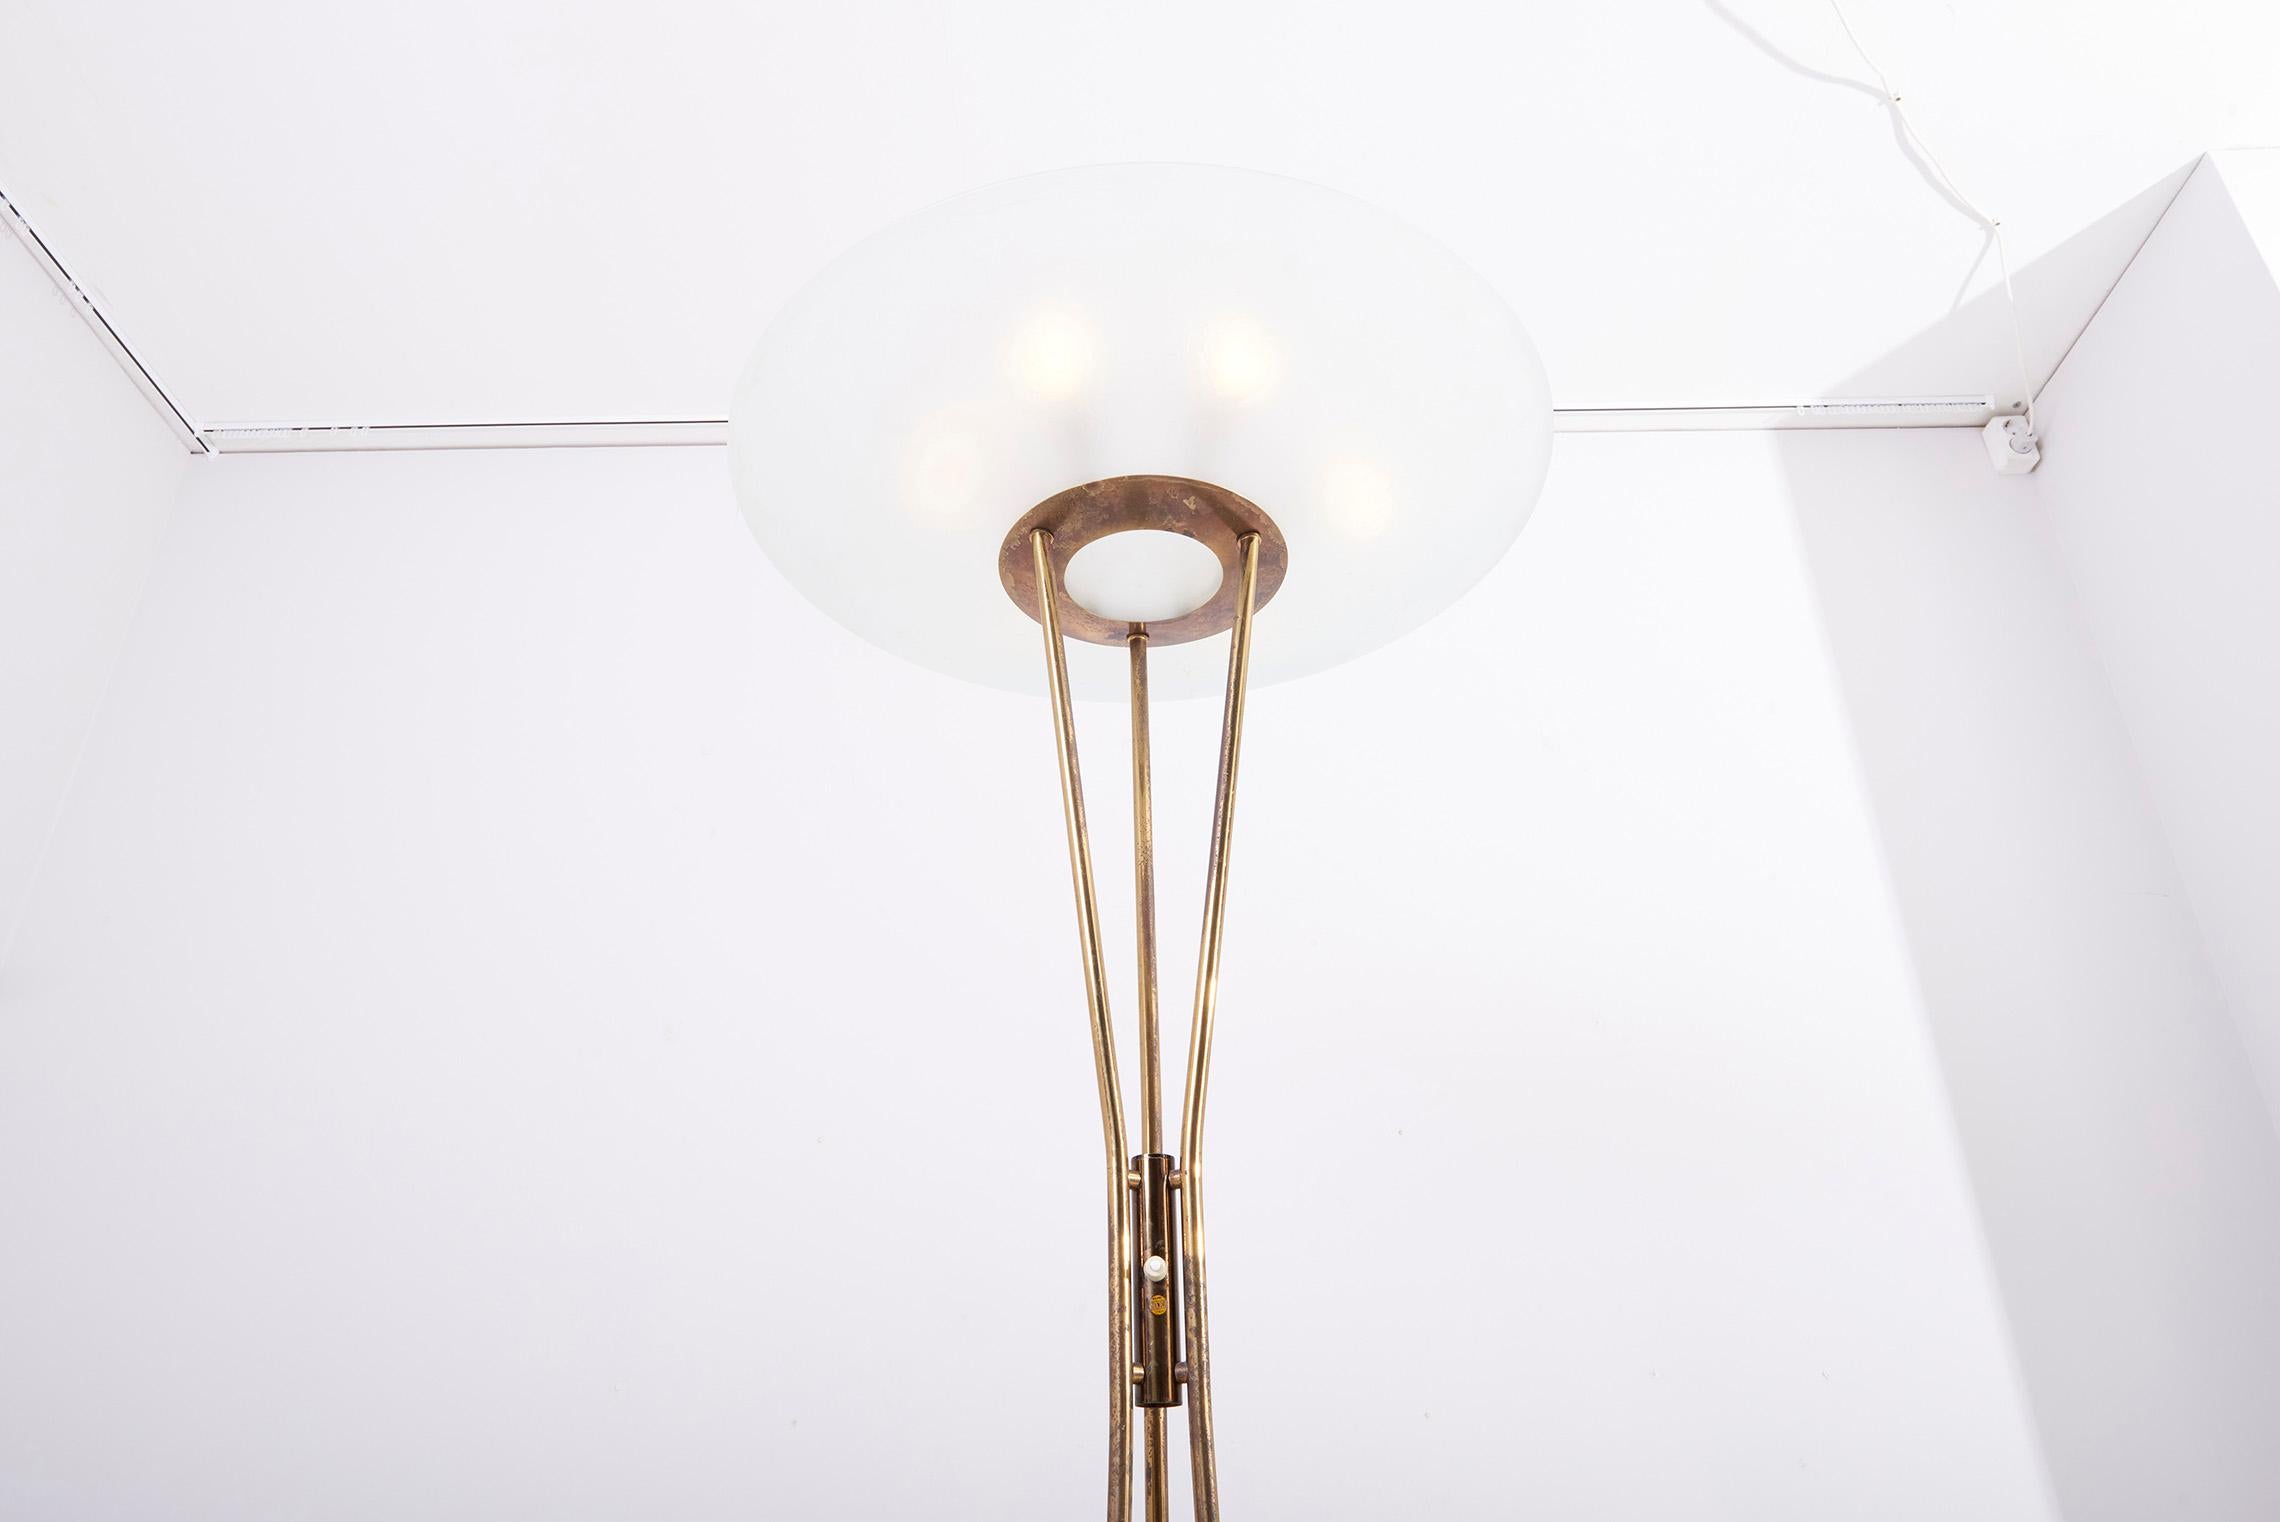 Signed Stilnovo Floor Lamp with Brass and Marble Base, Italy, 1950s For Sale 11